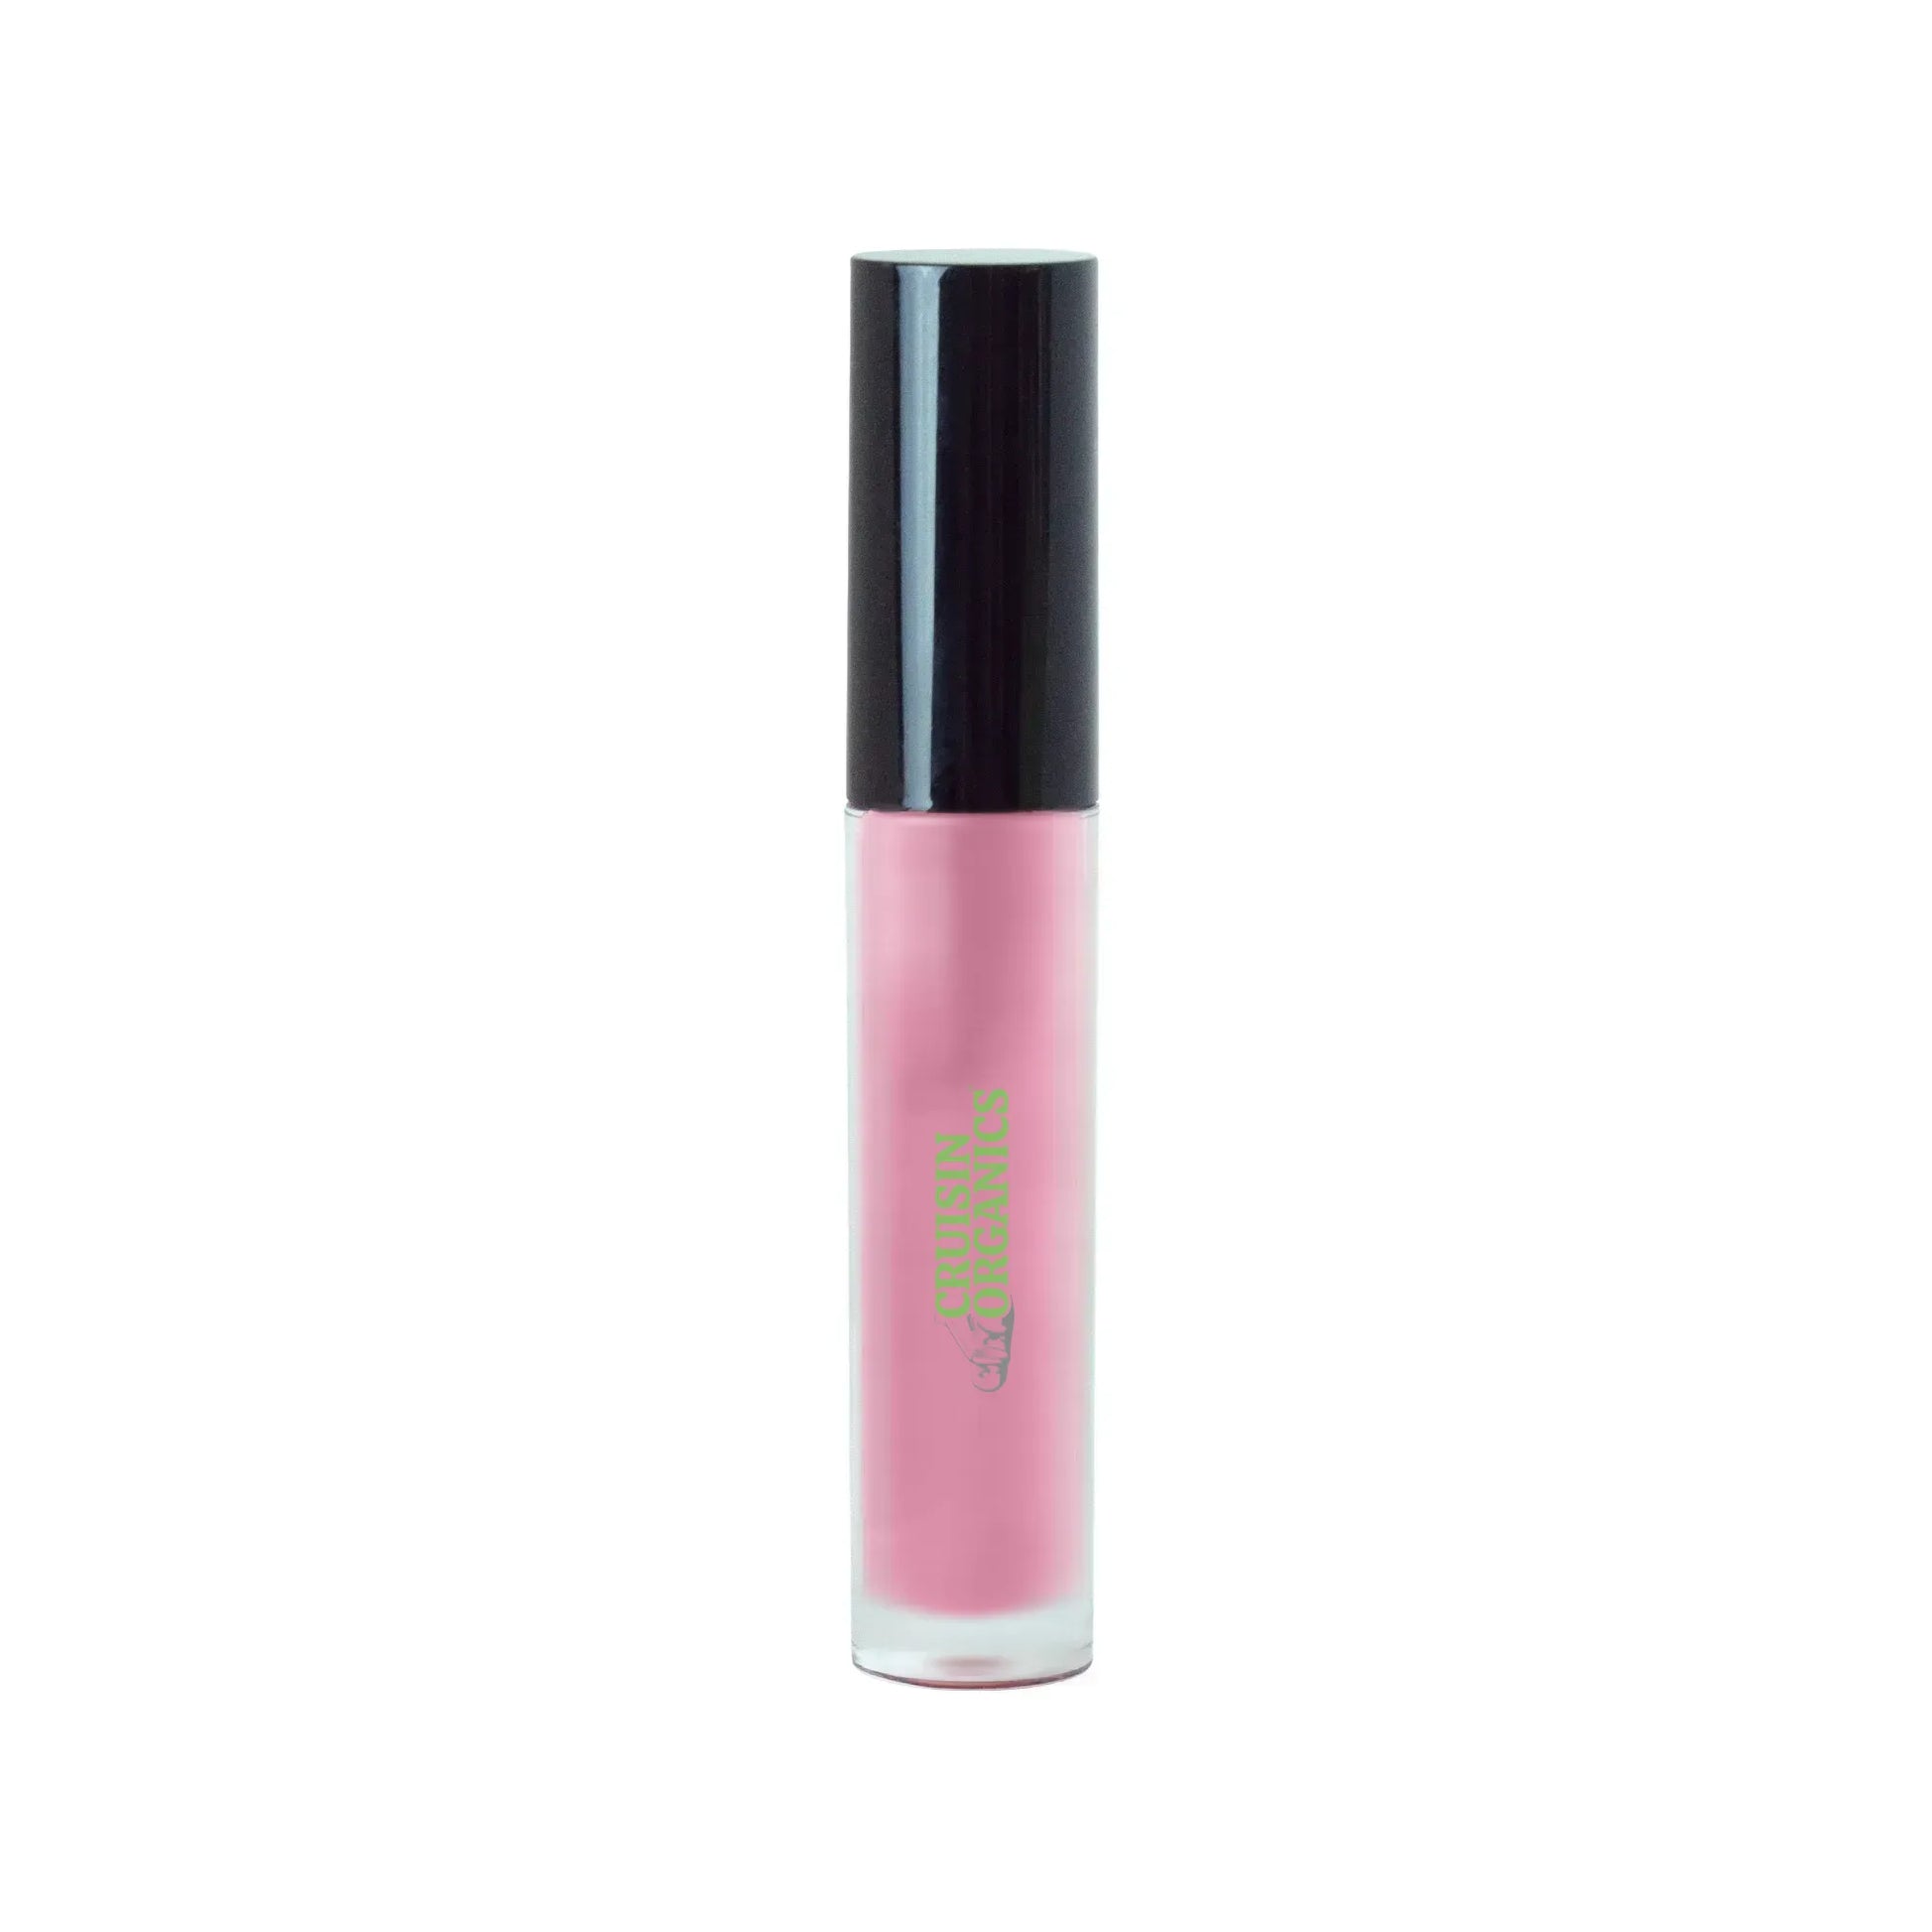  Designed with a pink tint, this lip gloss not only adds a cool luster but also provides essential hydration. Keep your lips looking and feeling great with this must-have product from Cruisin Organics.